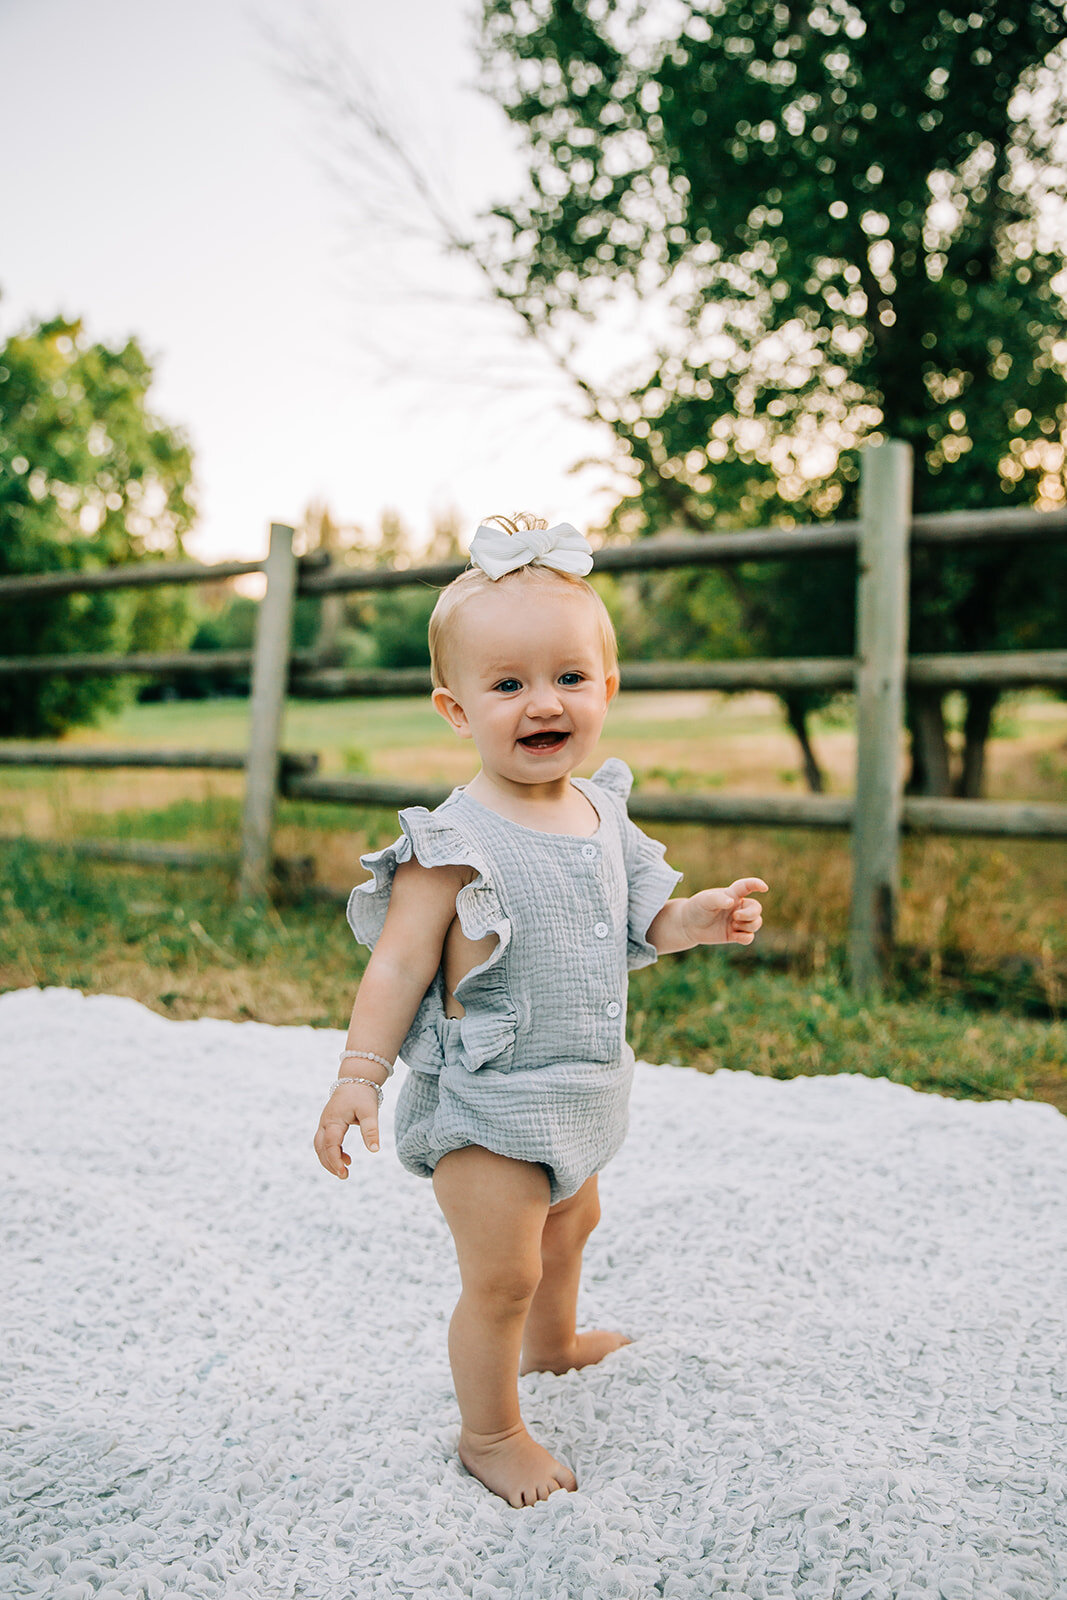  kids photography green field simple background sunny day outfit change kids fashion inspo baby girl outfit insp standing on a blanket baby posing standing poses inspo baby jewelry inspo first birthday turning one year old girl power cache valley pho